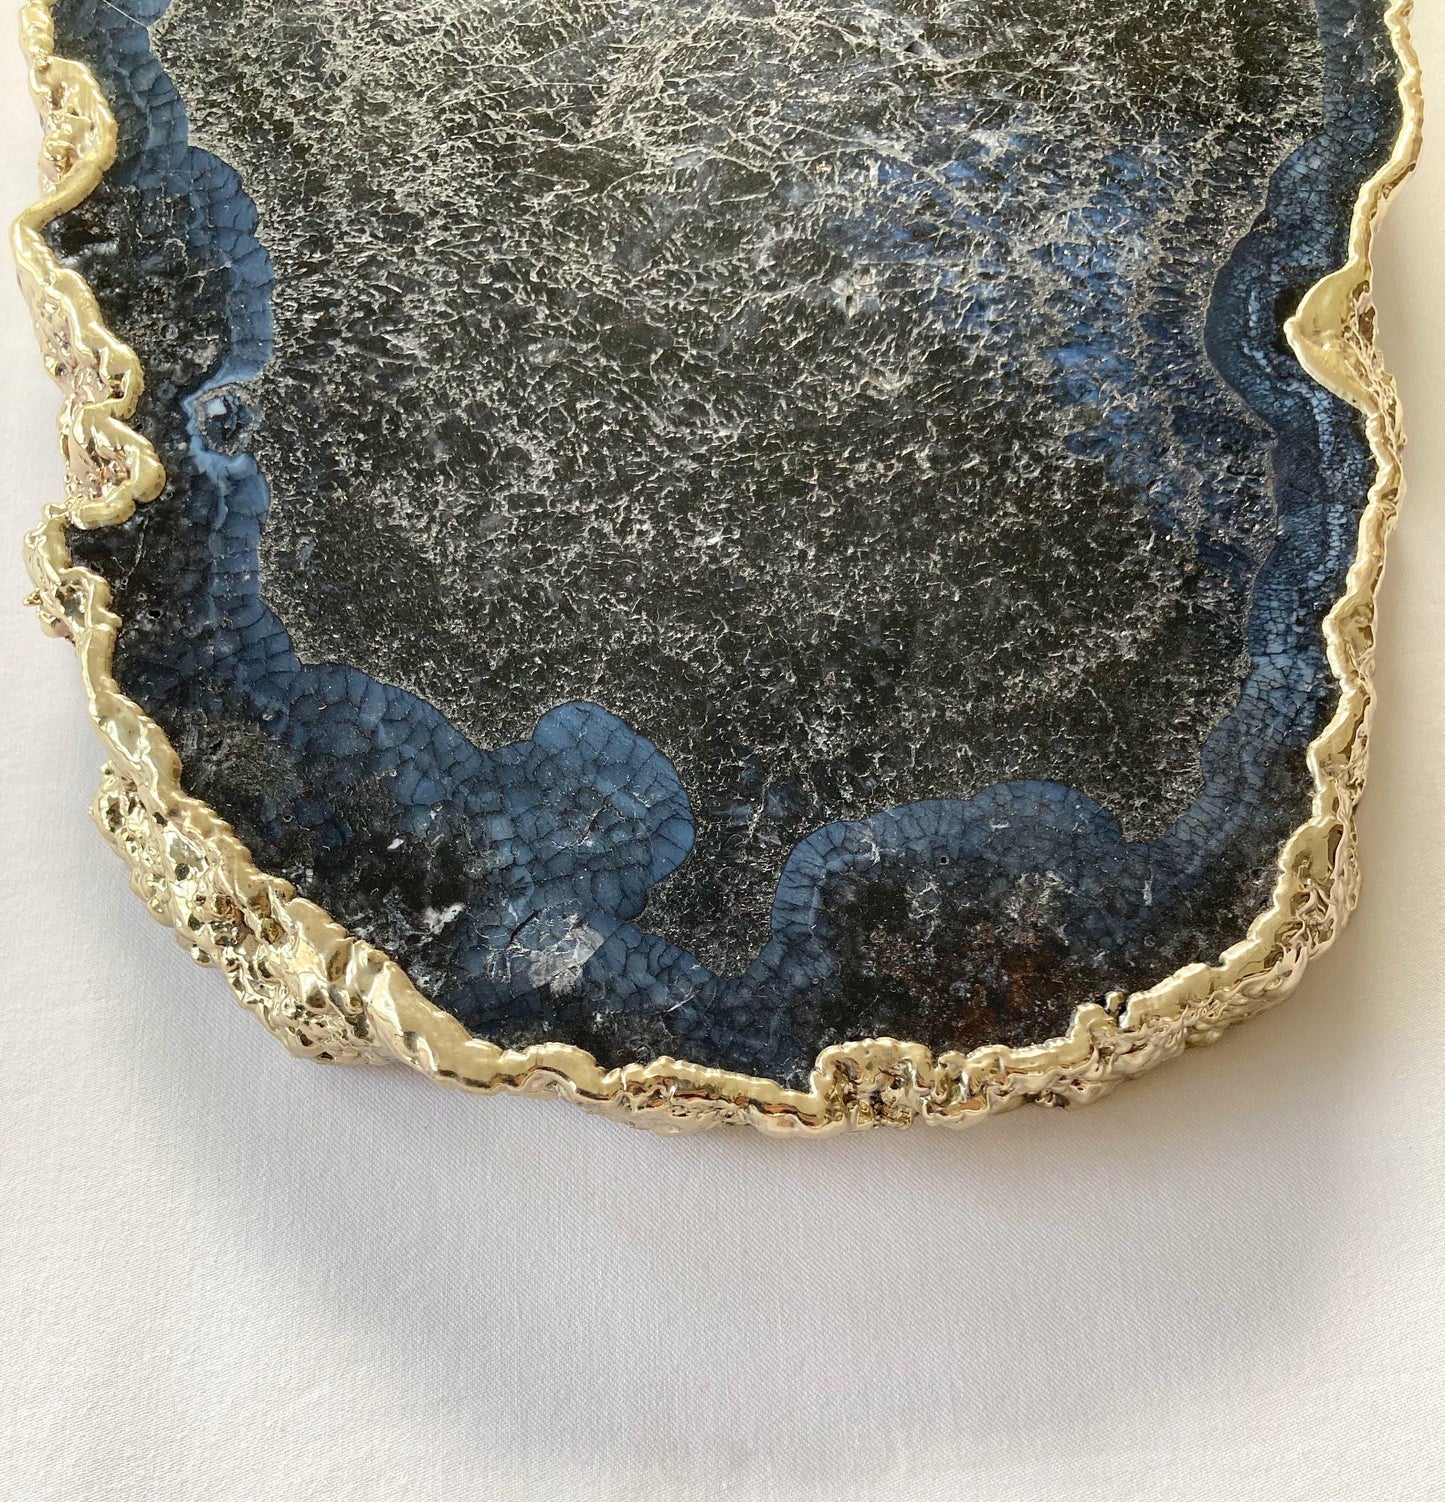 Large Black and Blue Agate Cheese Platter Tray - MAIA HOMES